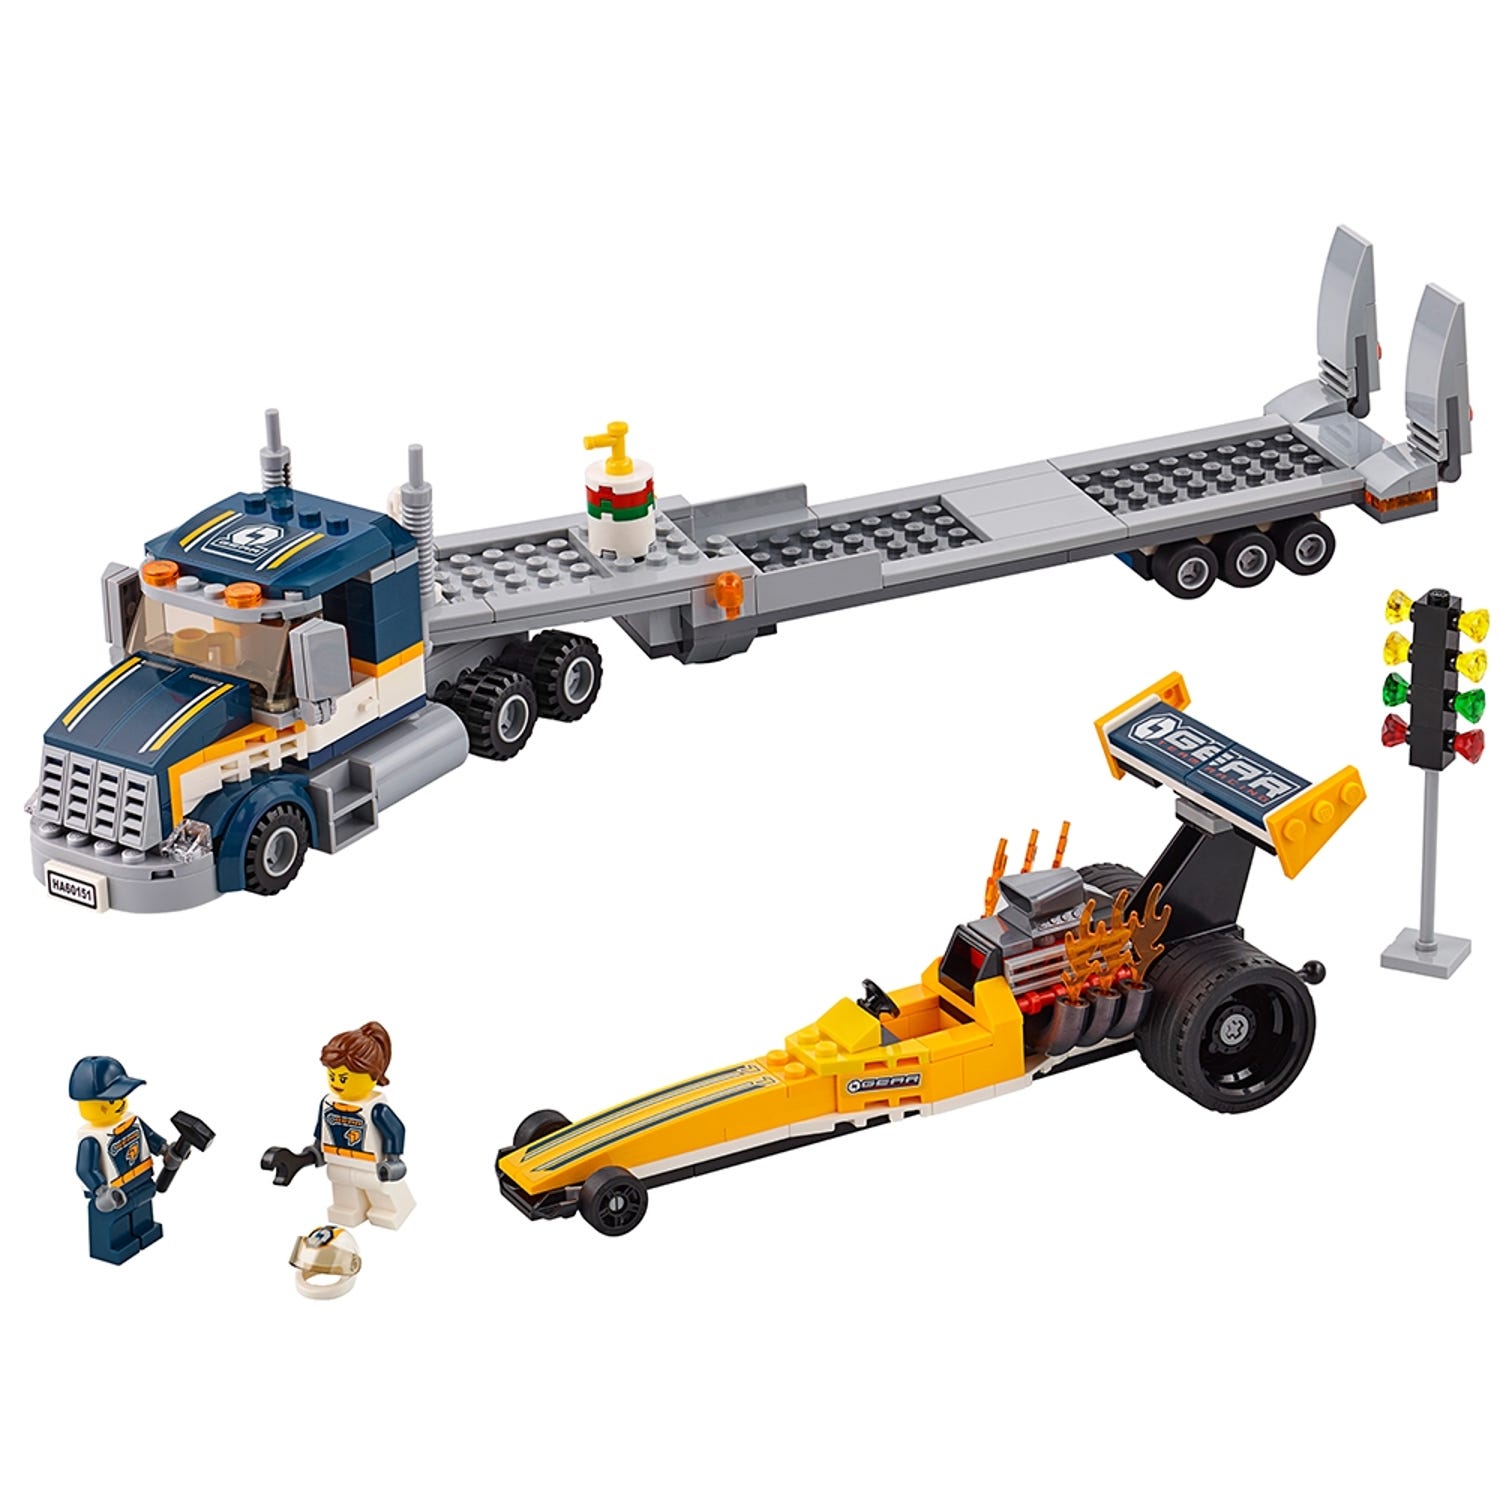 Dragster Transporter 60151 | City | online at the Official LEGO® Shop